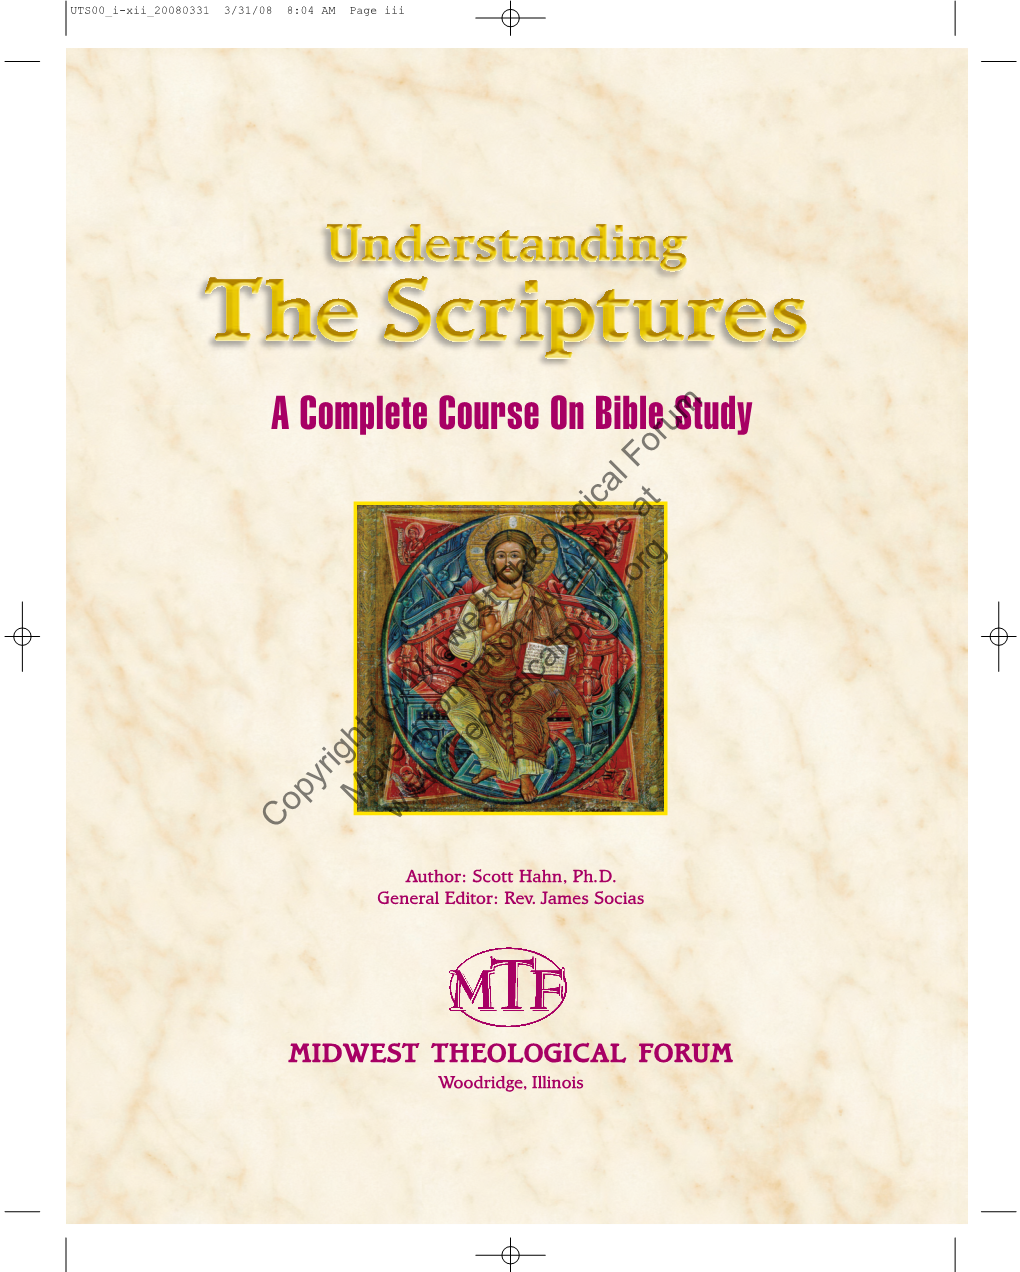 A Complete Course on Bible Study Forum